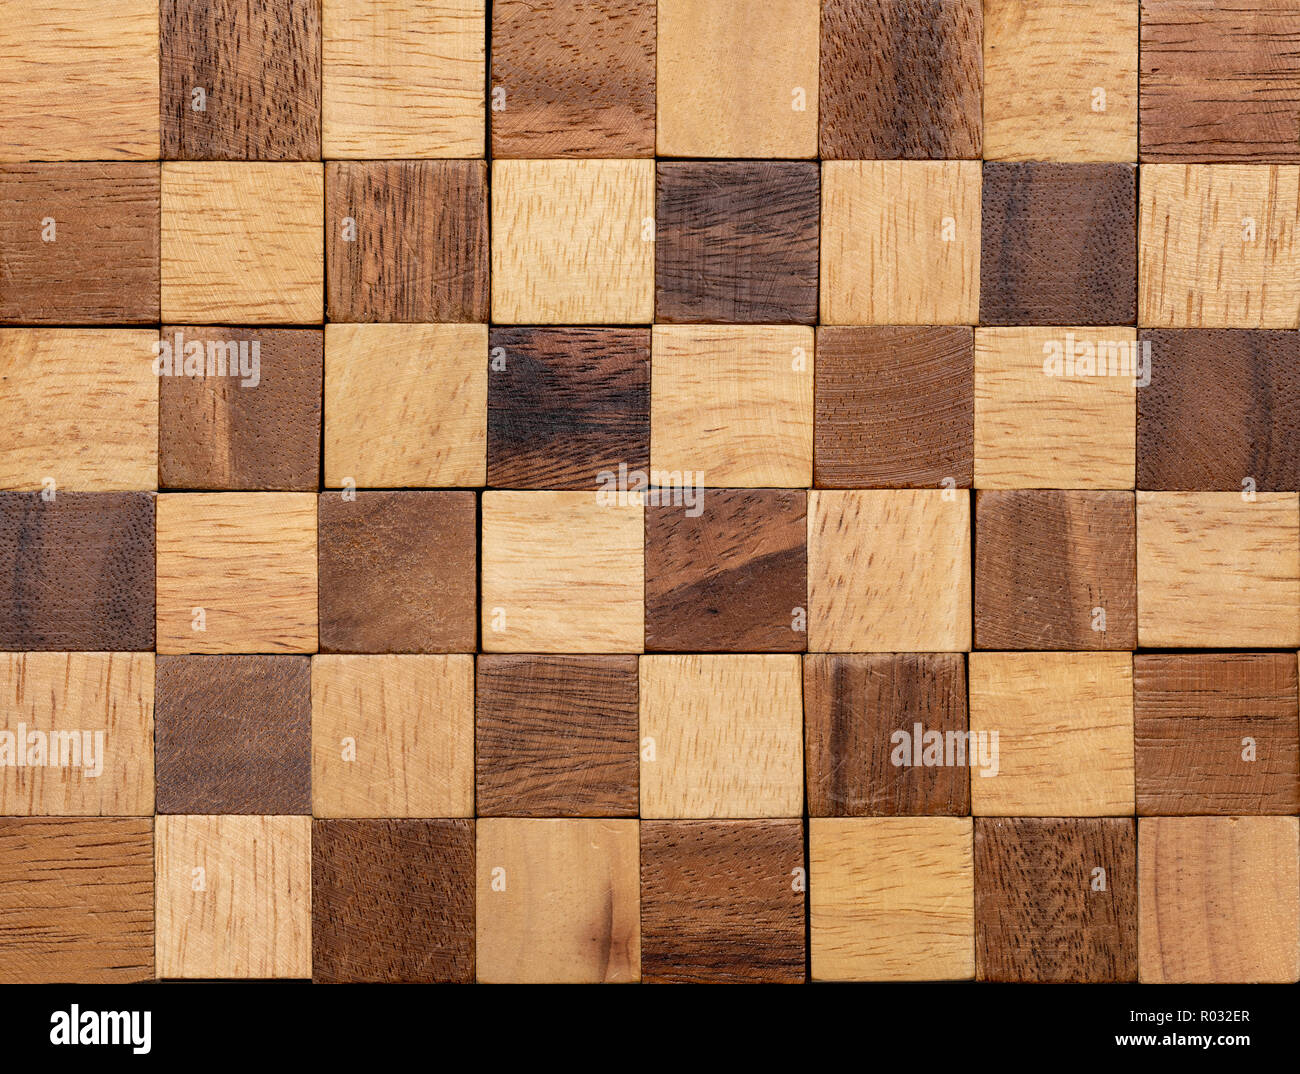 Wood texture. Pictures of light and dark color. Stock Photo